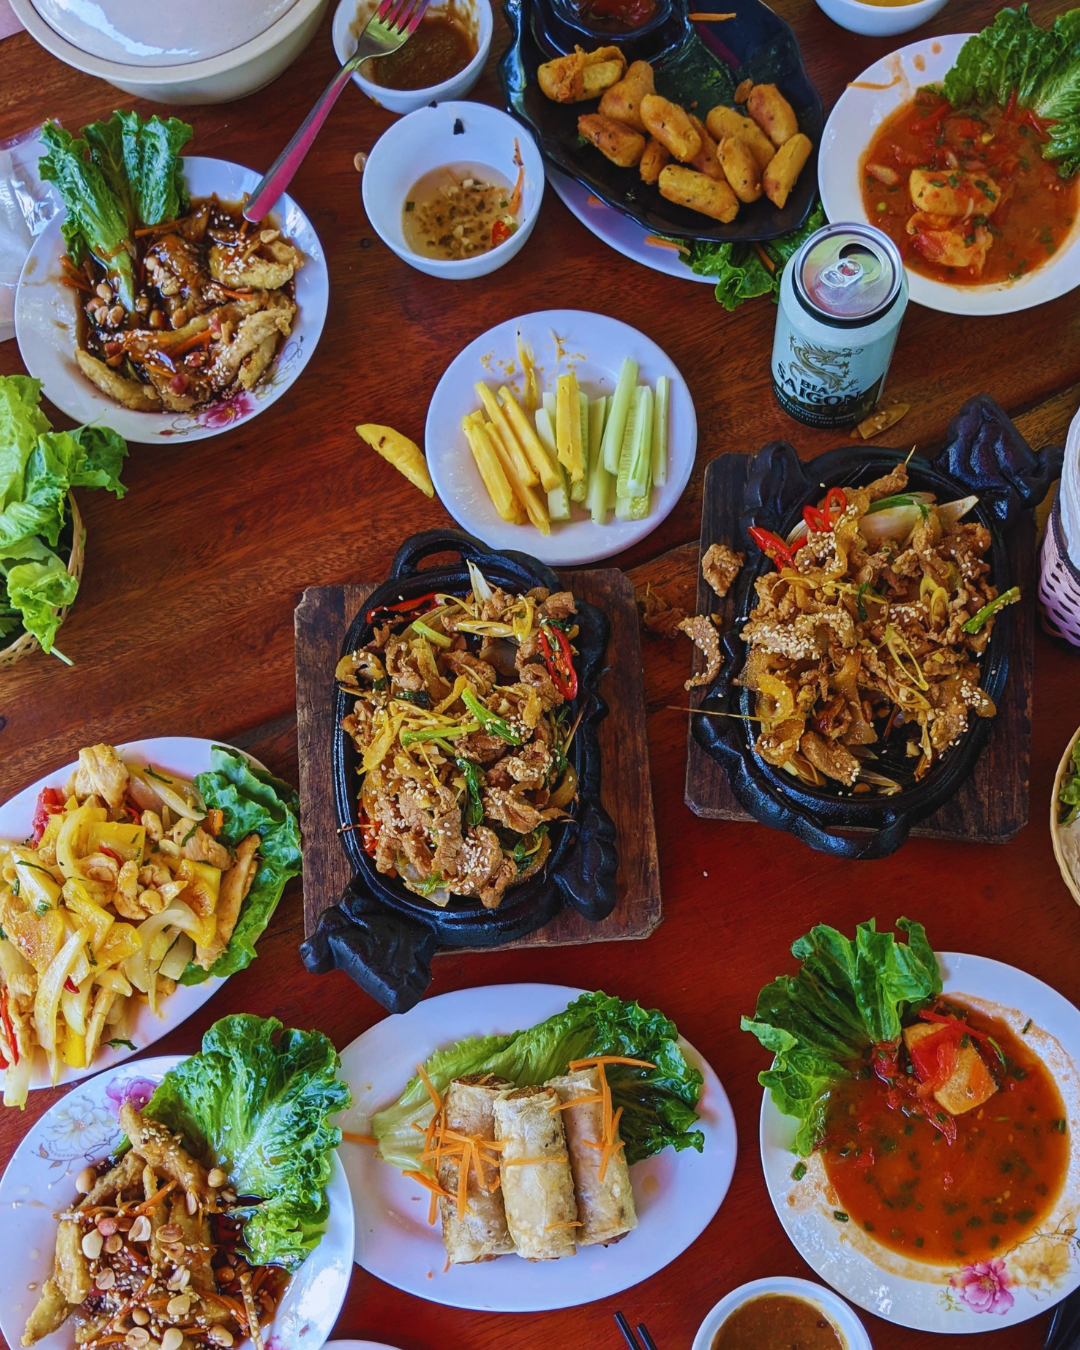 Our final Vietnam highlight post! A large table filled with a variety of dishes made with love and shared across a group of people.